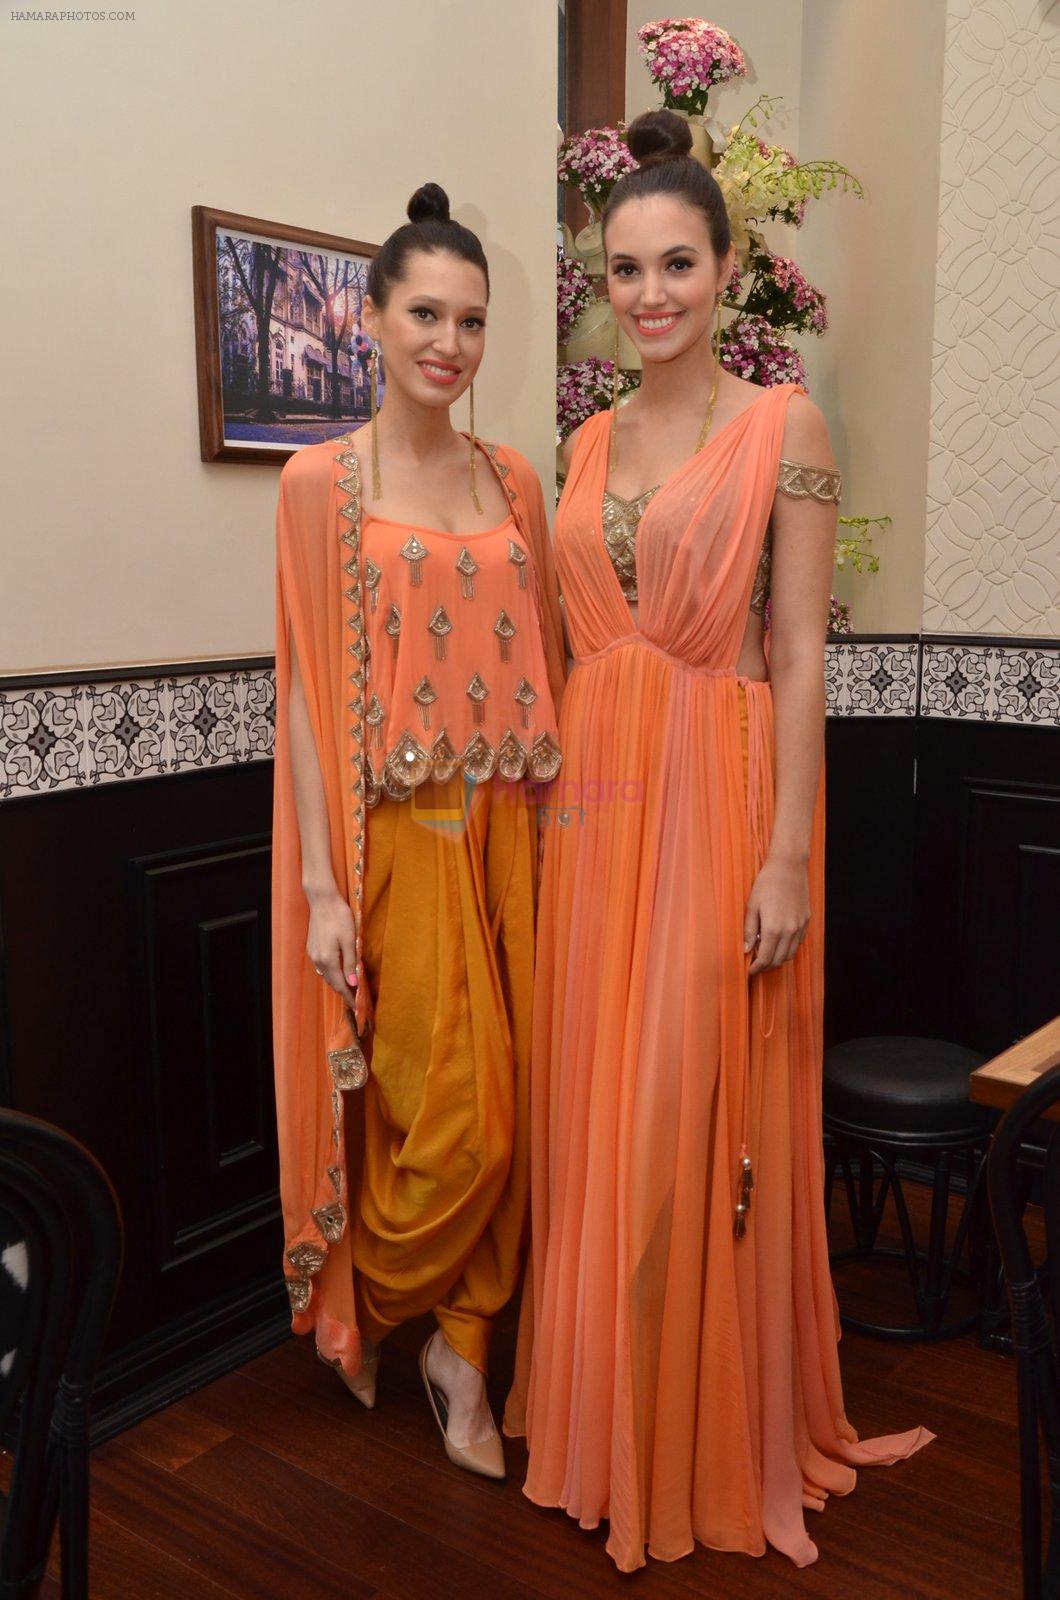 at Arpita Mehta's fashion preview in Le15 Cafe Colaba on 1st March 2016